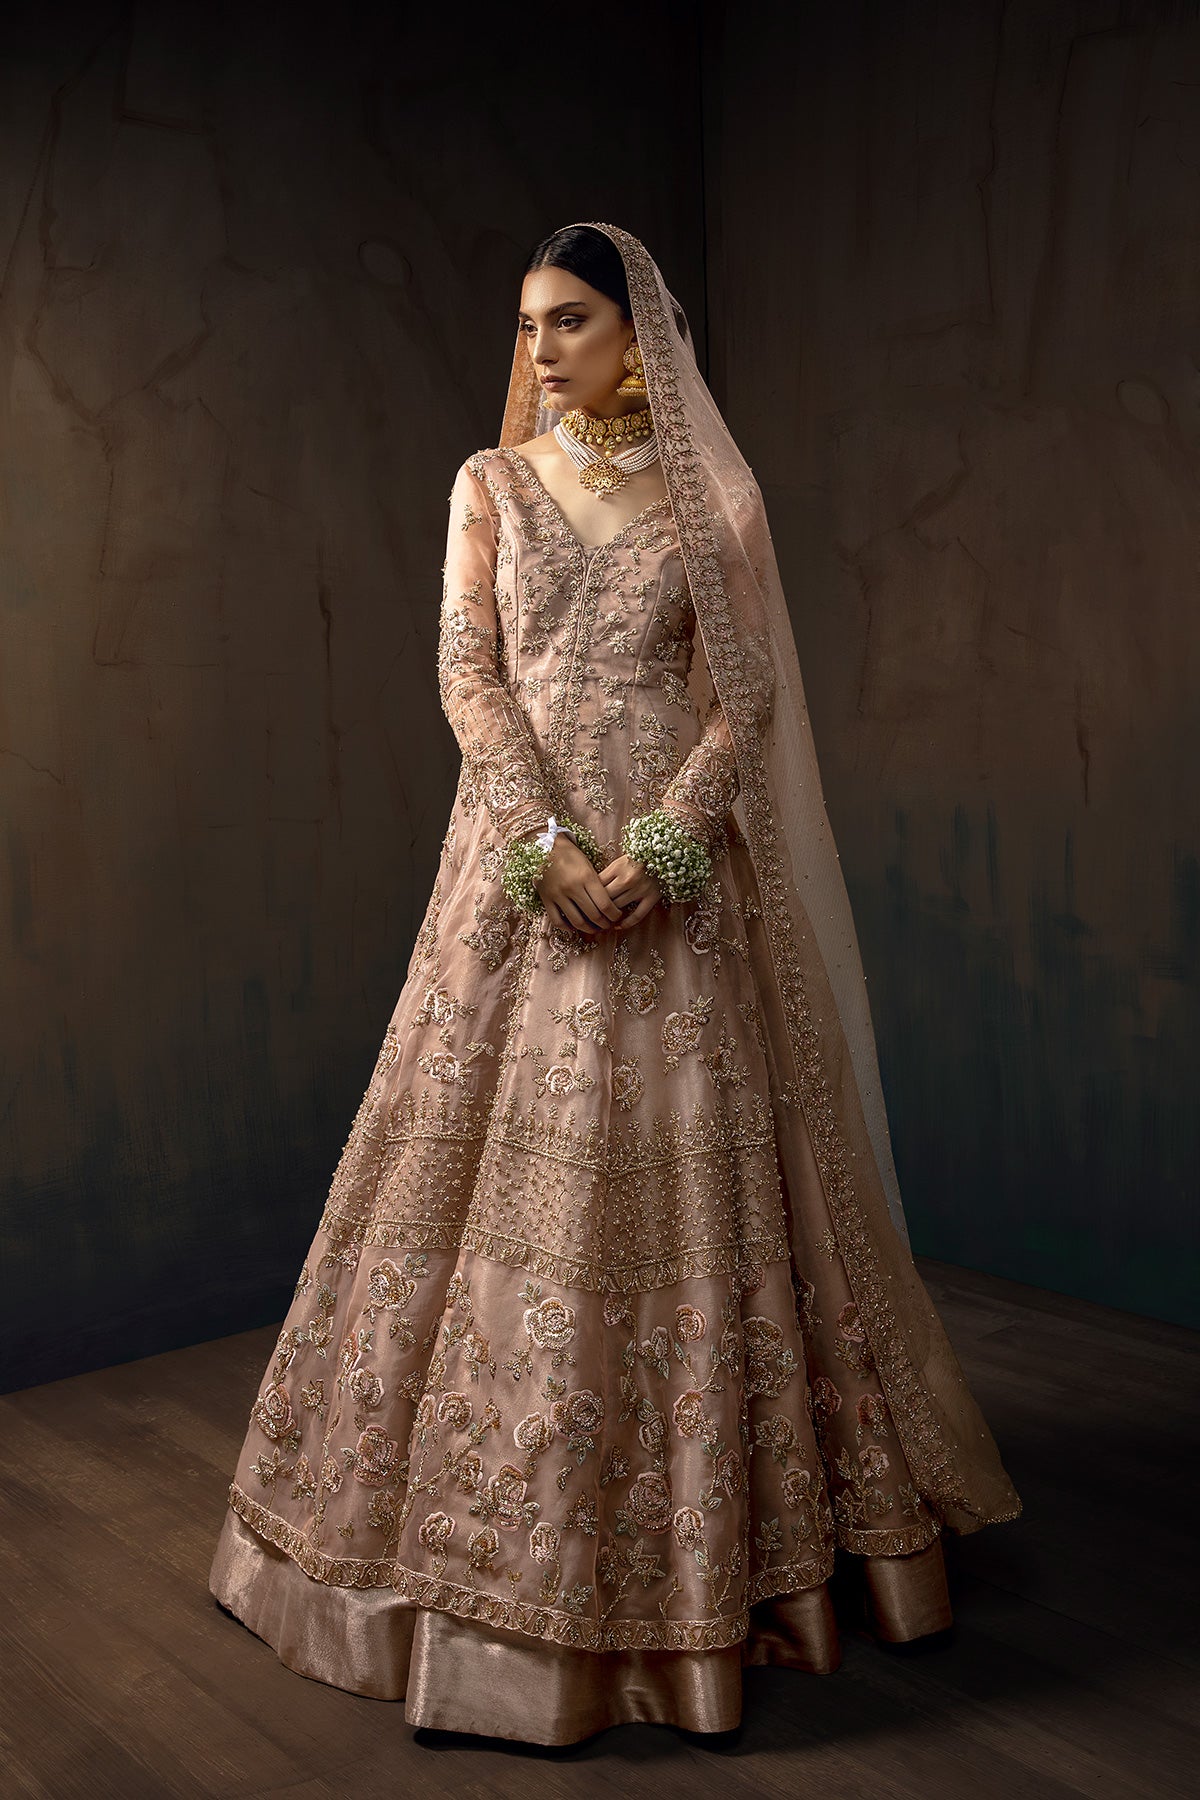 Golden Pakistani Bridal Outfit in Gown Lehenga Style